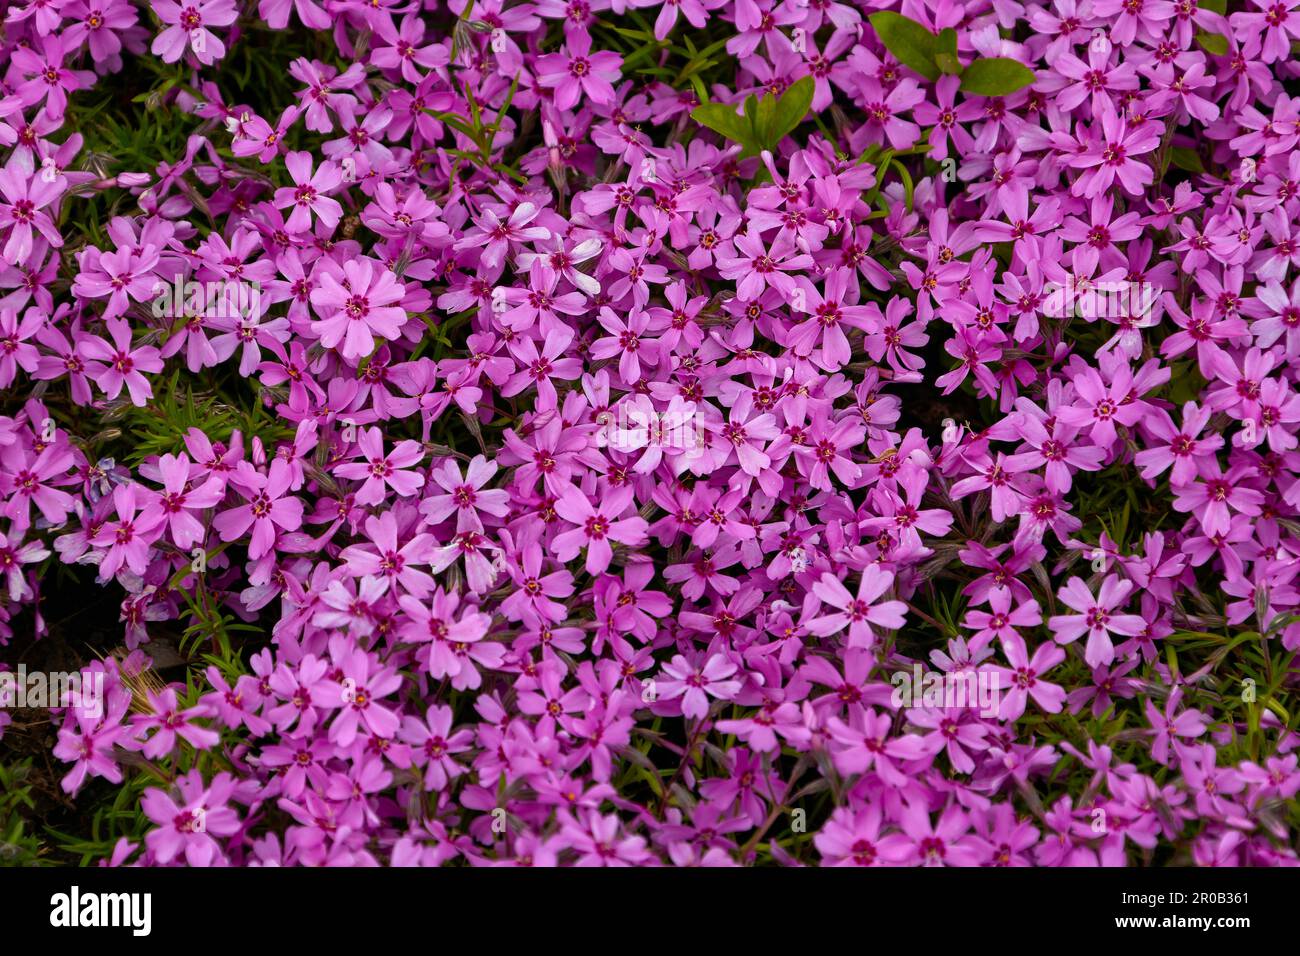 Image of vegetable background from Phlox subulata Marjorie Stock Photo